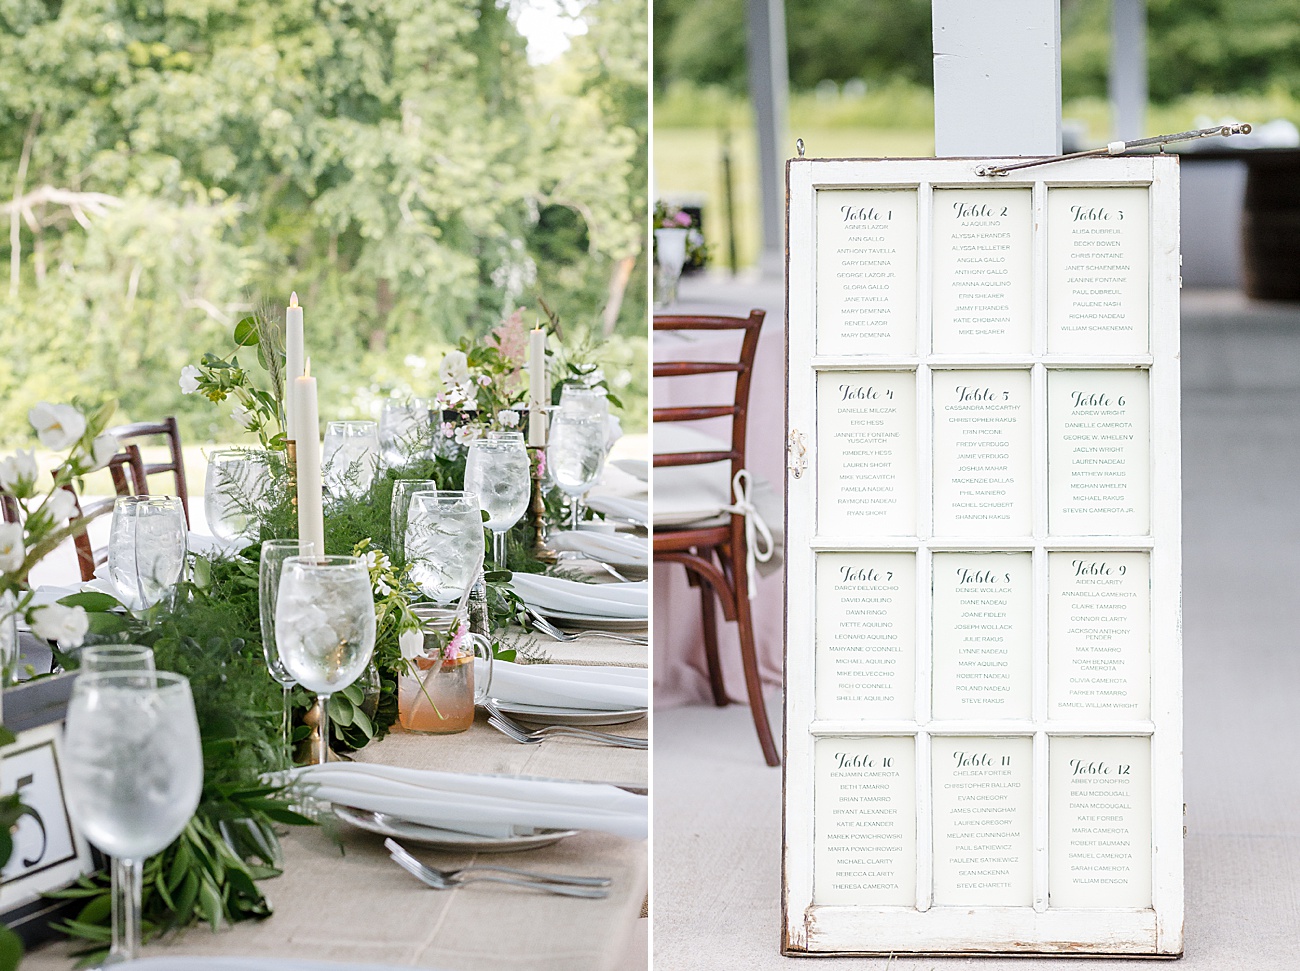 Table and seating chart at Parmelee Farm Wedding in Killingworth CT by Jamerlyn Brown Photography